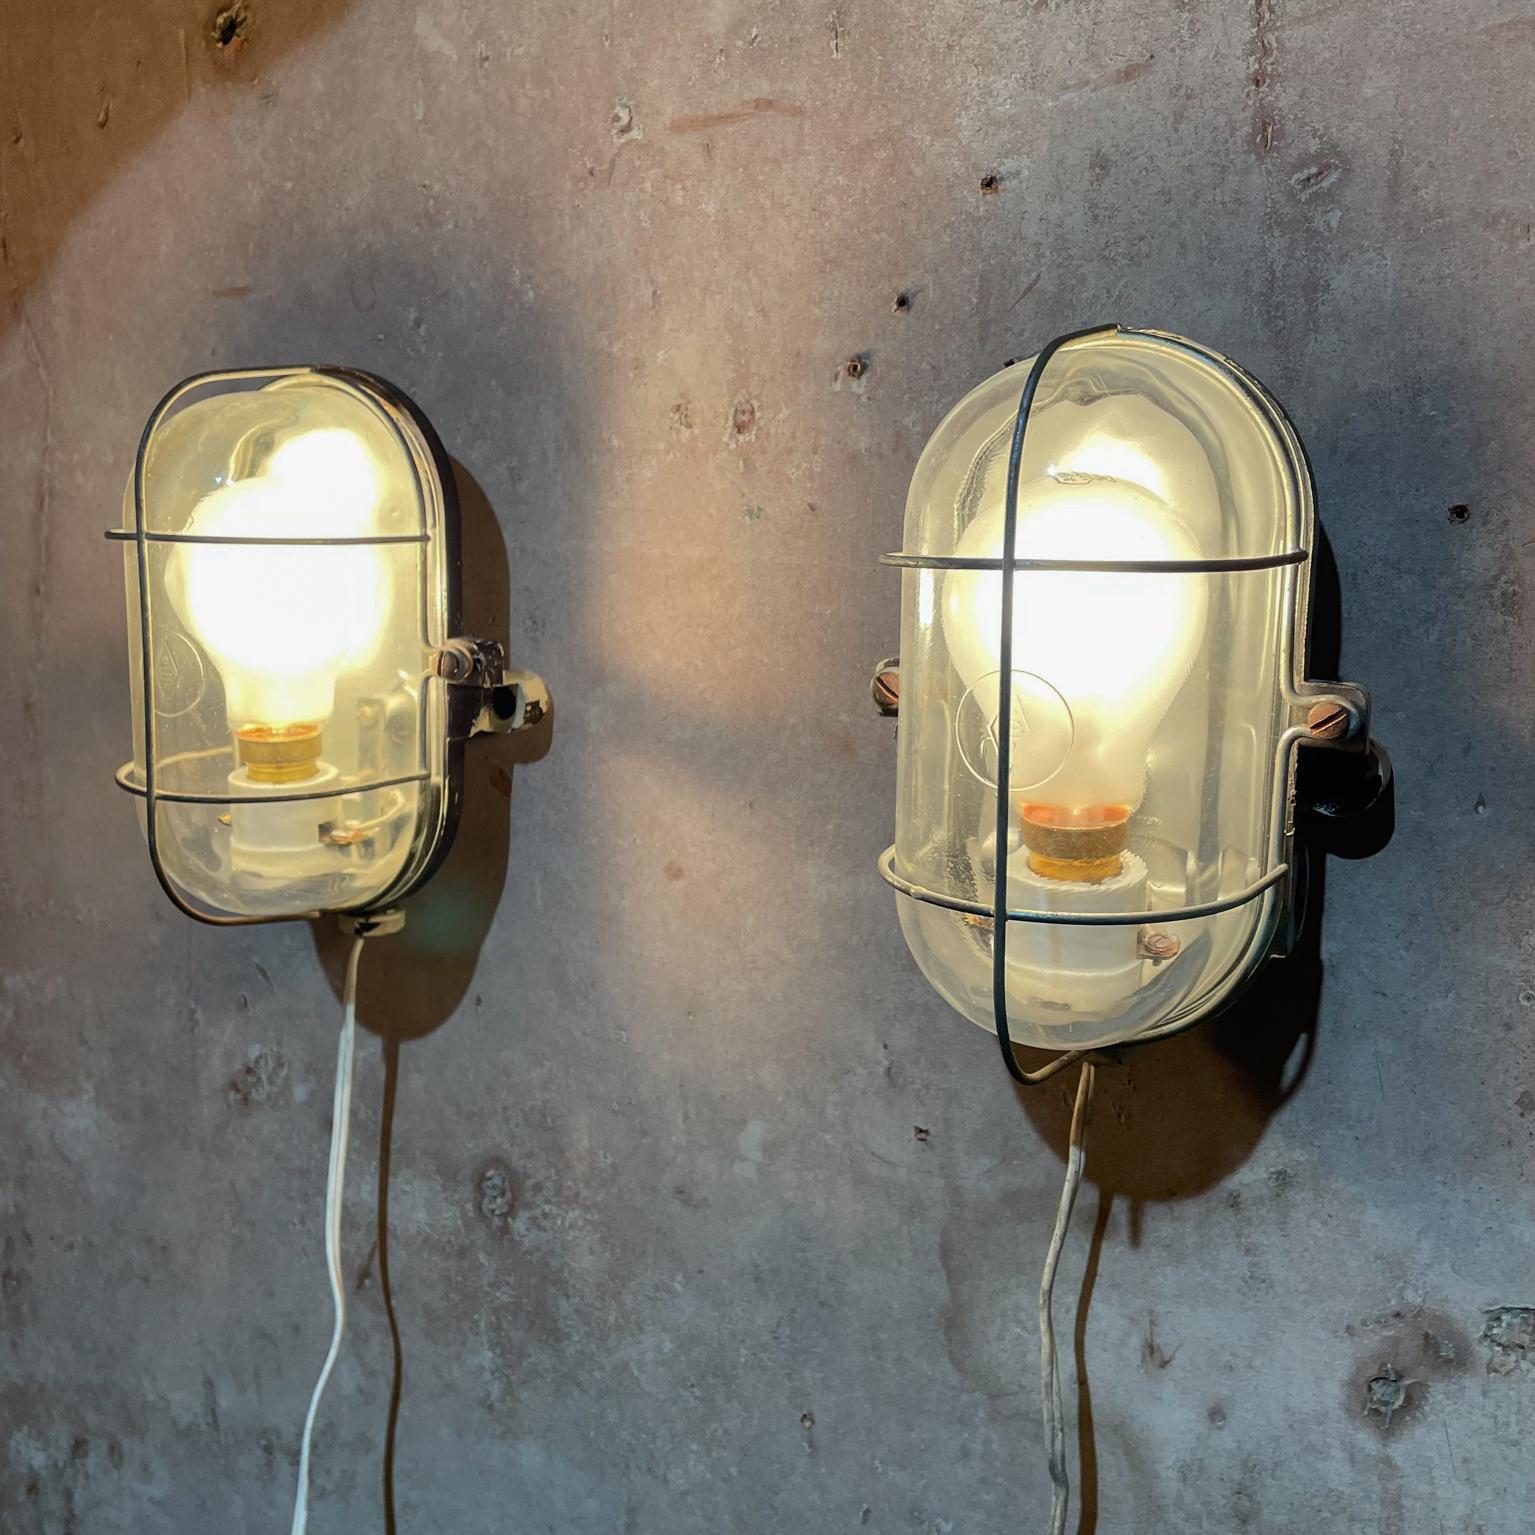 Vintage wall lights
Pair of French wall sconces Industrial Design. Made in France.
Measures: 7.5 H x 5 W x 4.25 inches
Hard plastic shell appears as Bakelite has perforation to attach to the wall. 
Metal grid shell covers a protective glass